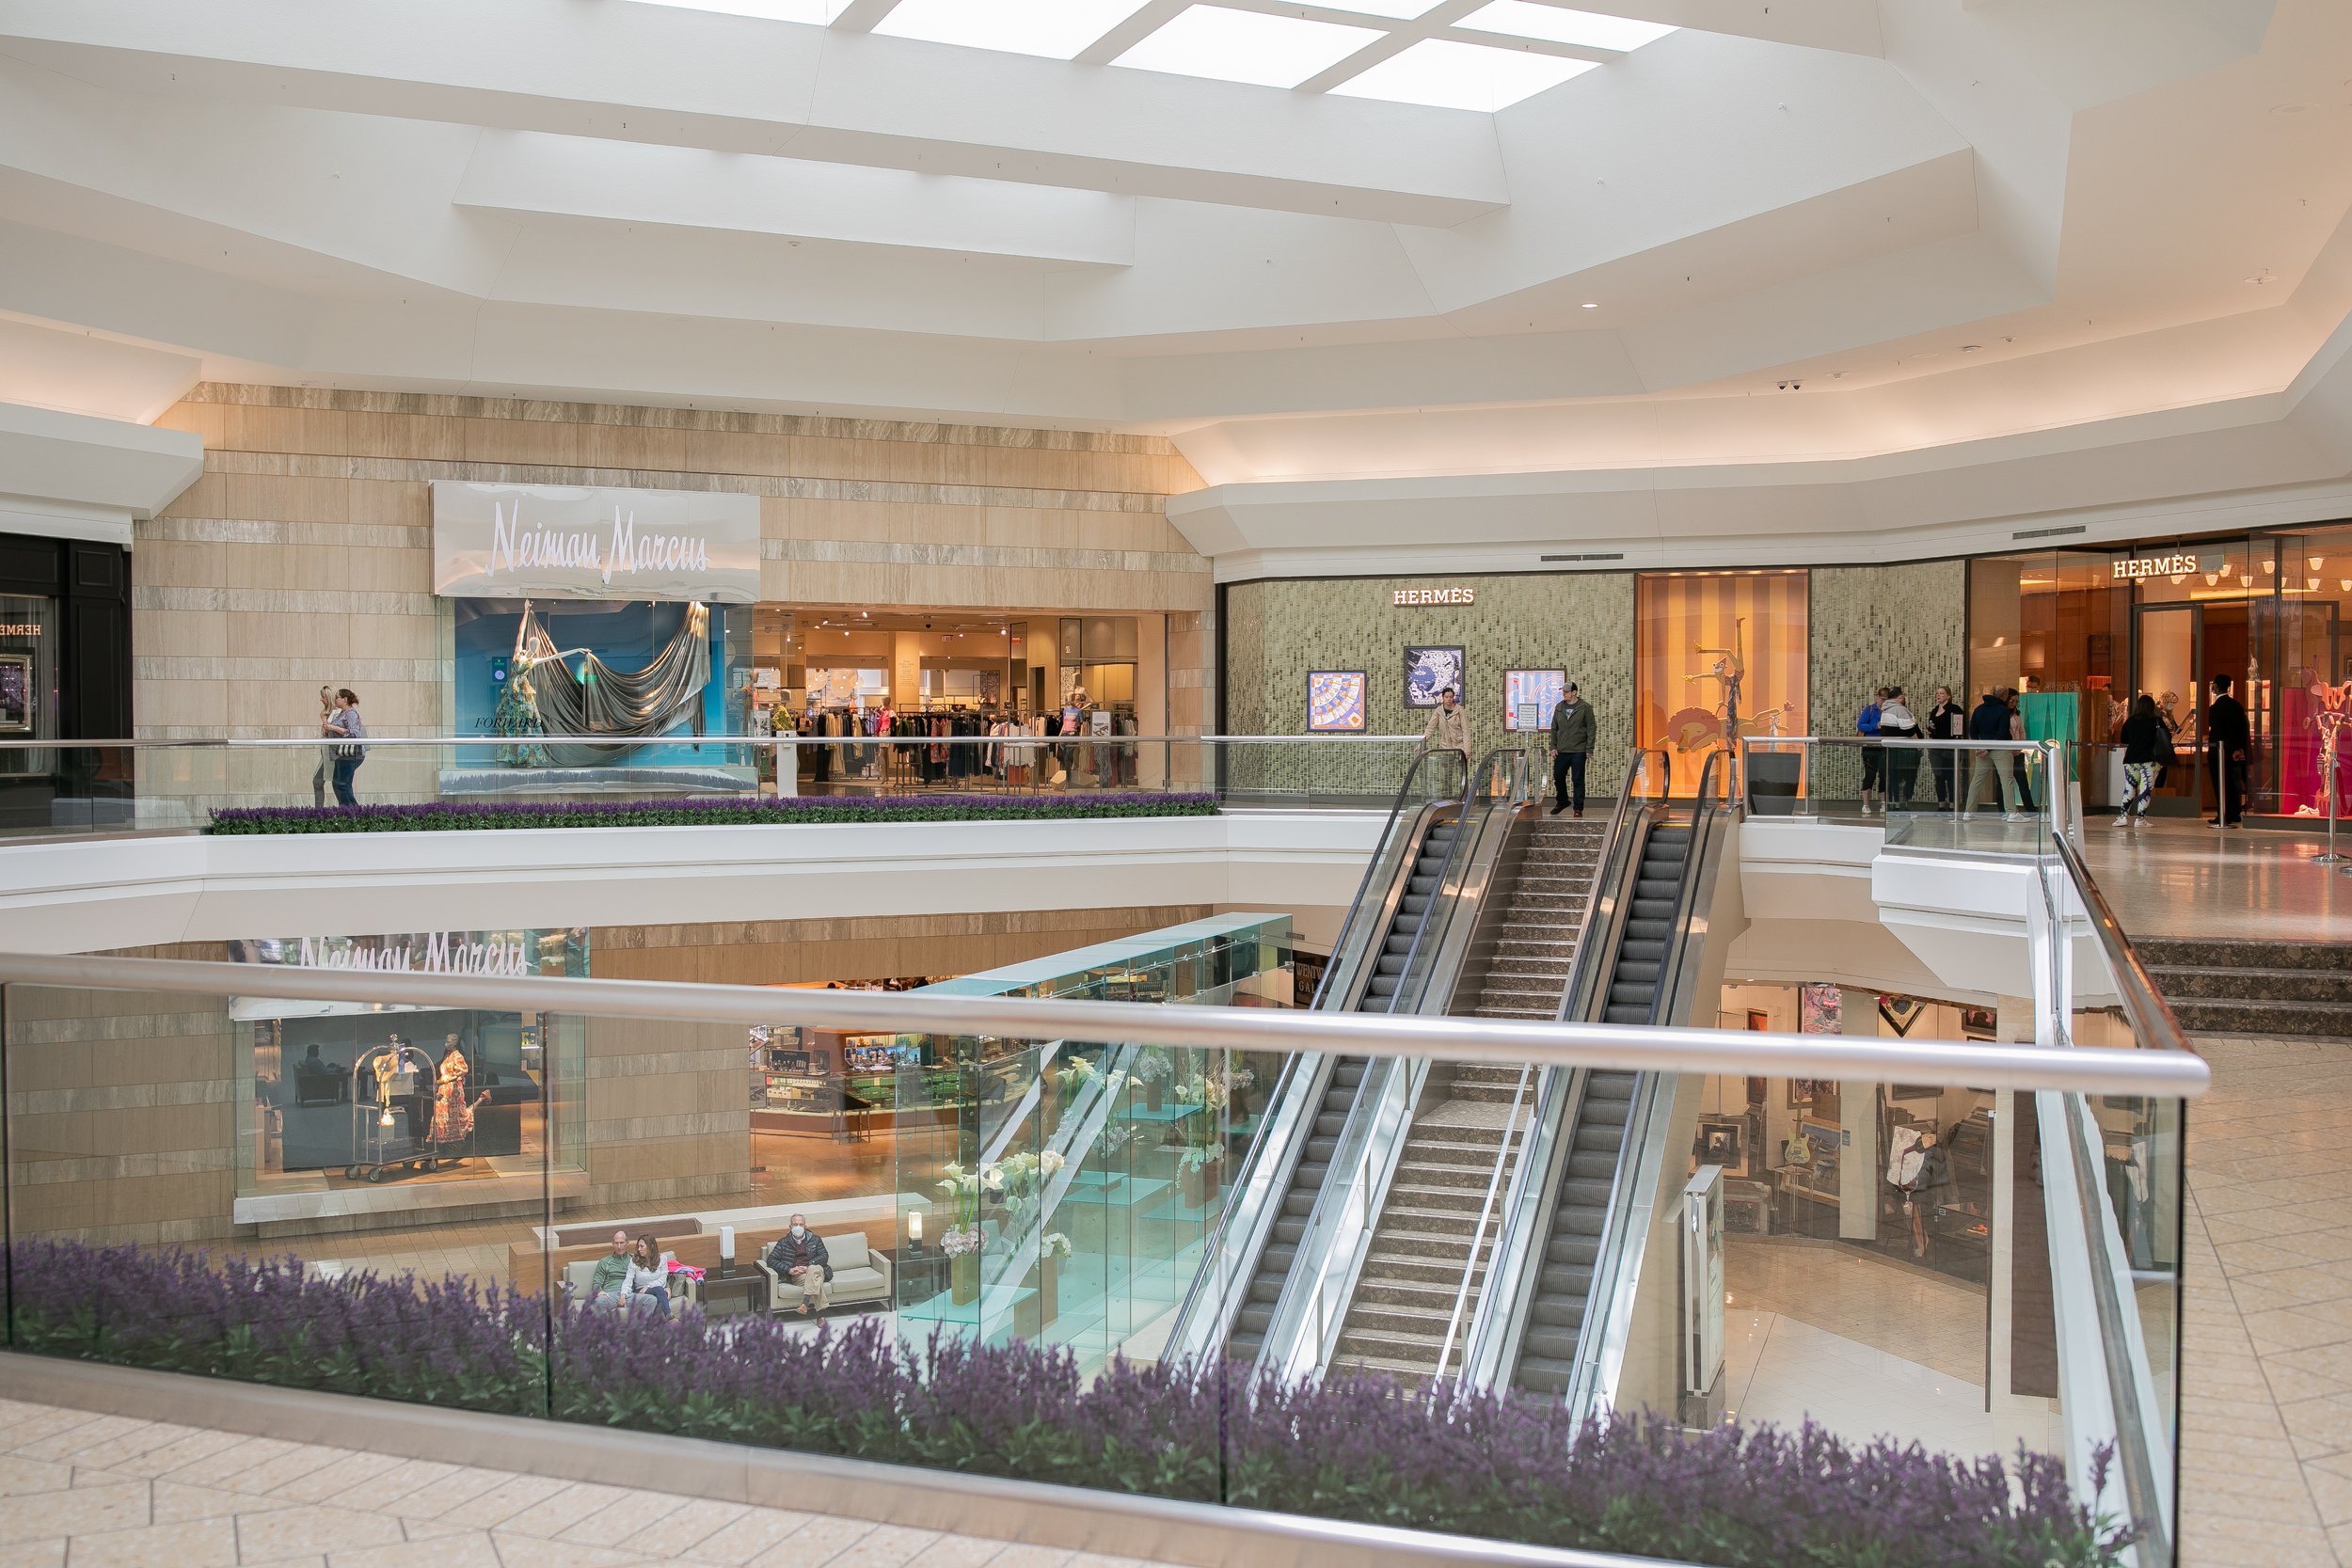 The Mall At Short Hills updated - The Mall At Short Hills